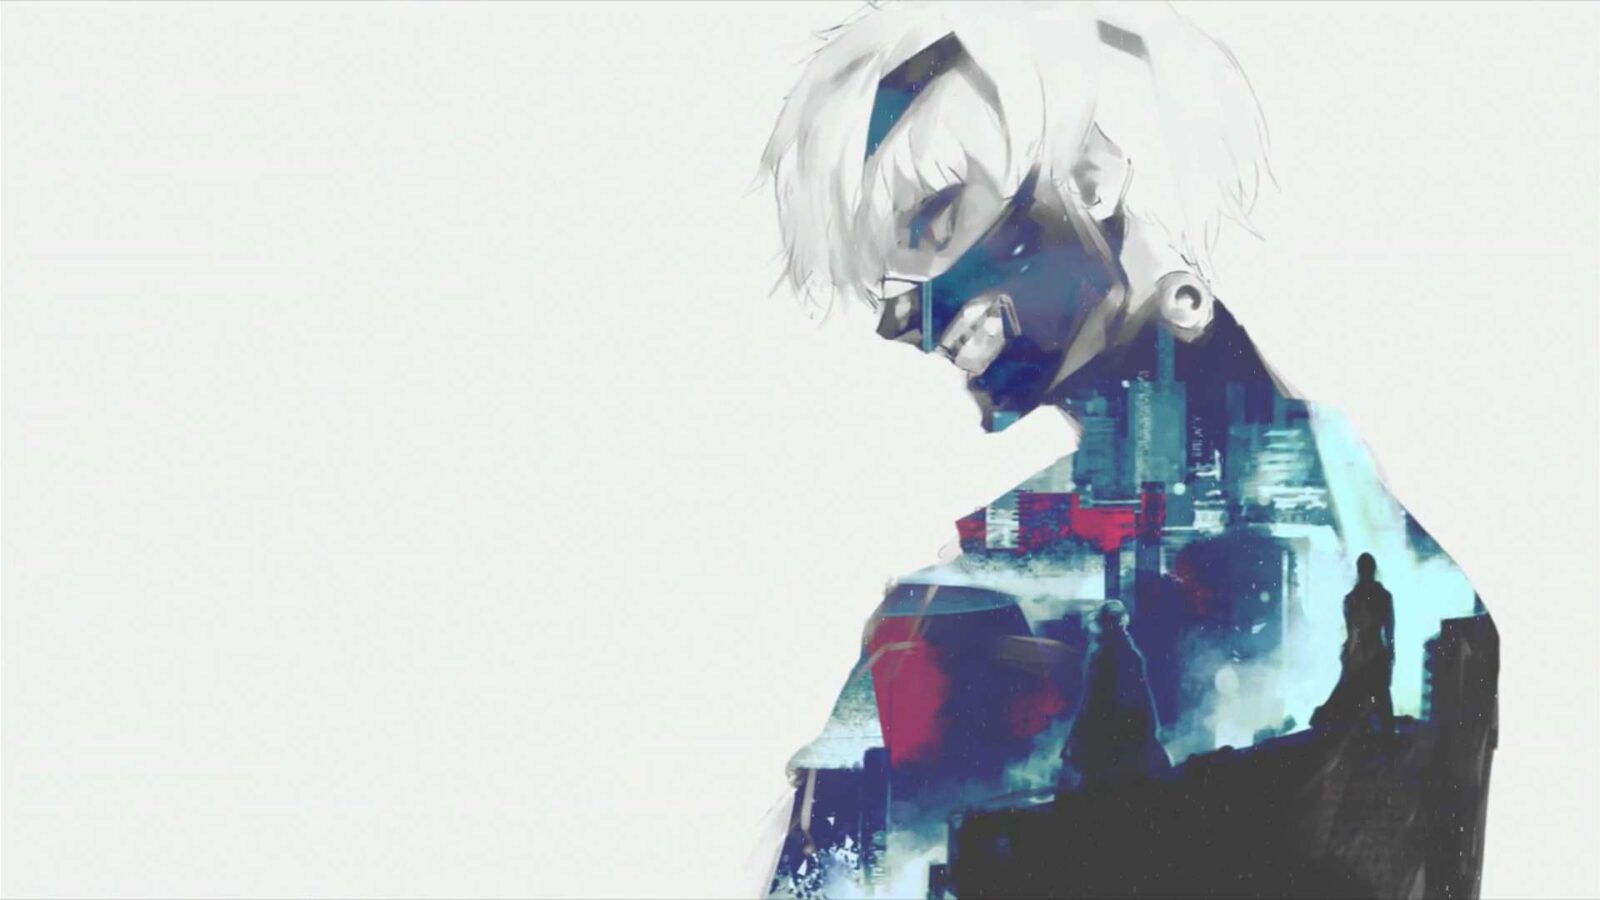 LiveWallpapers4Free.com | Tokyo Ghoul Anime - Free Live Wallpaper